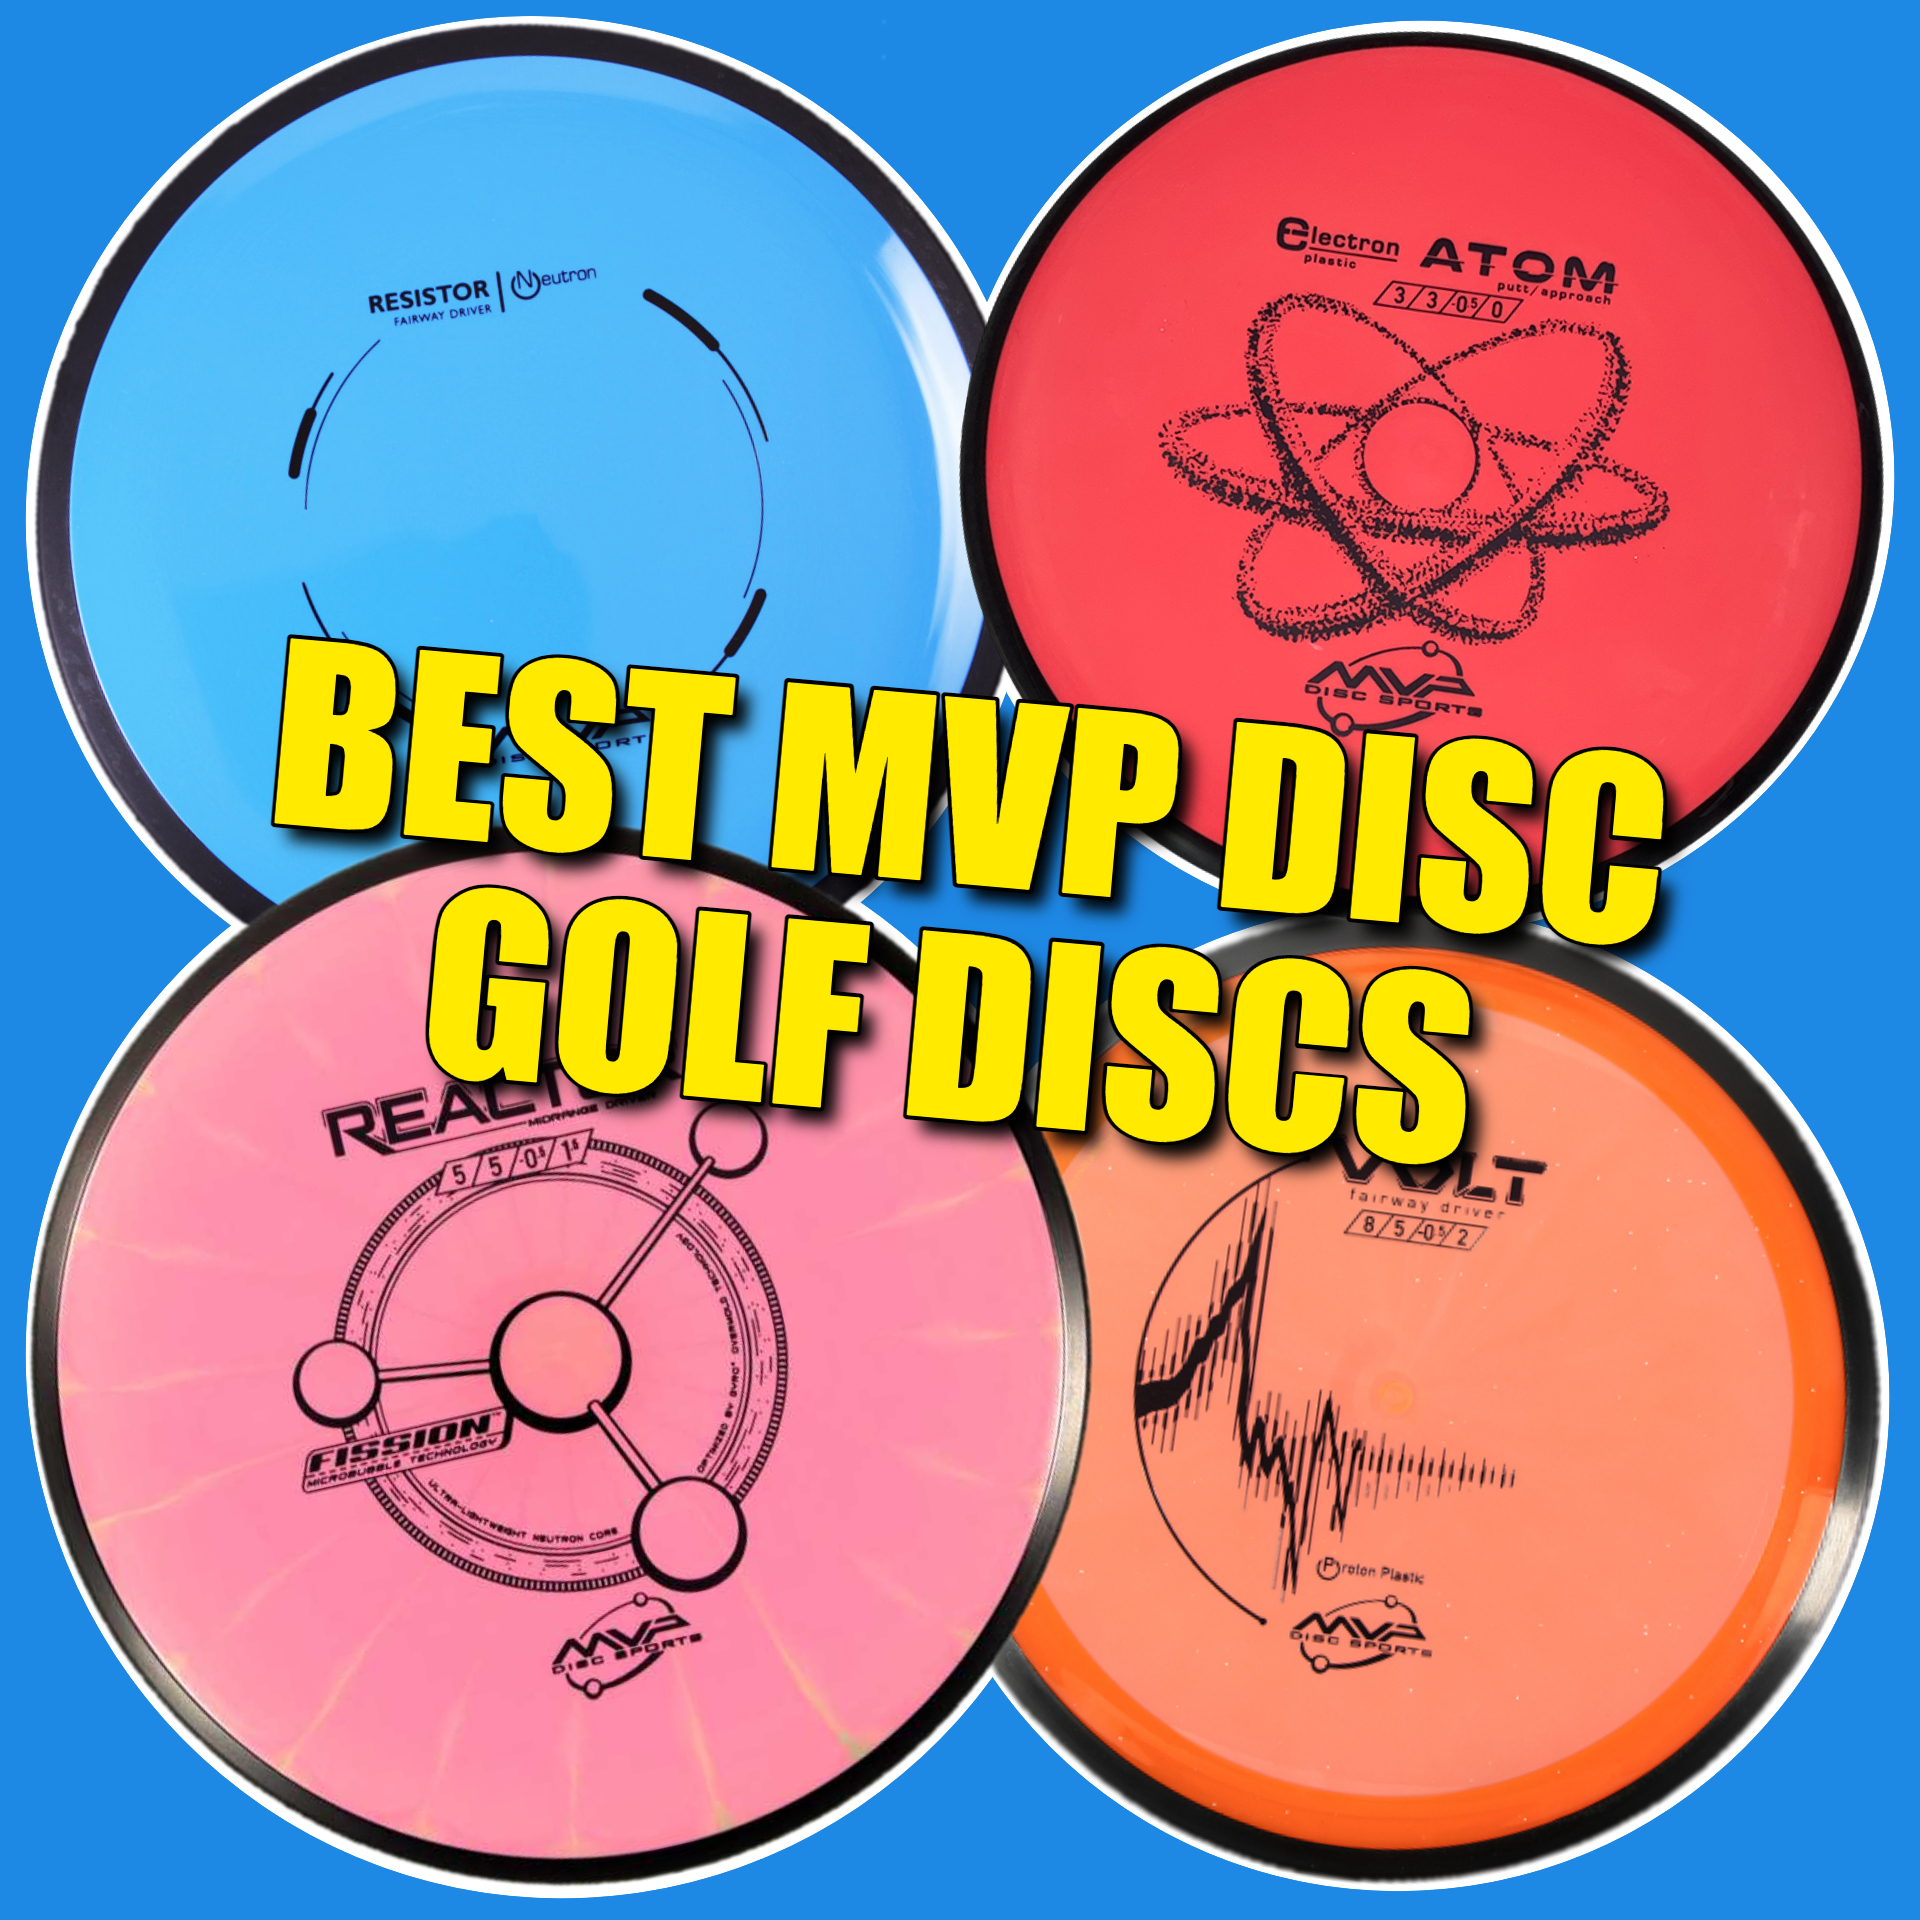 What are the best MVP disc golf discs